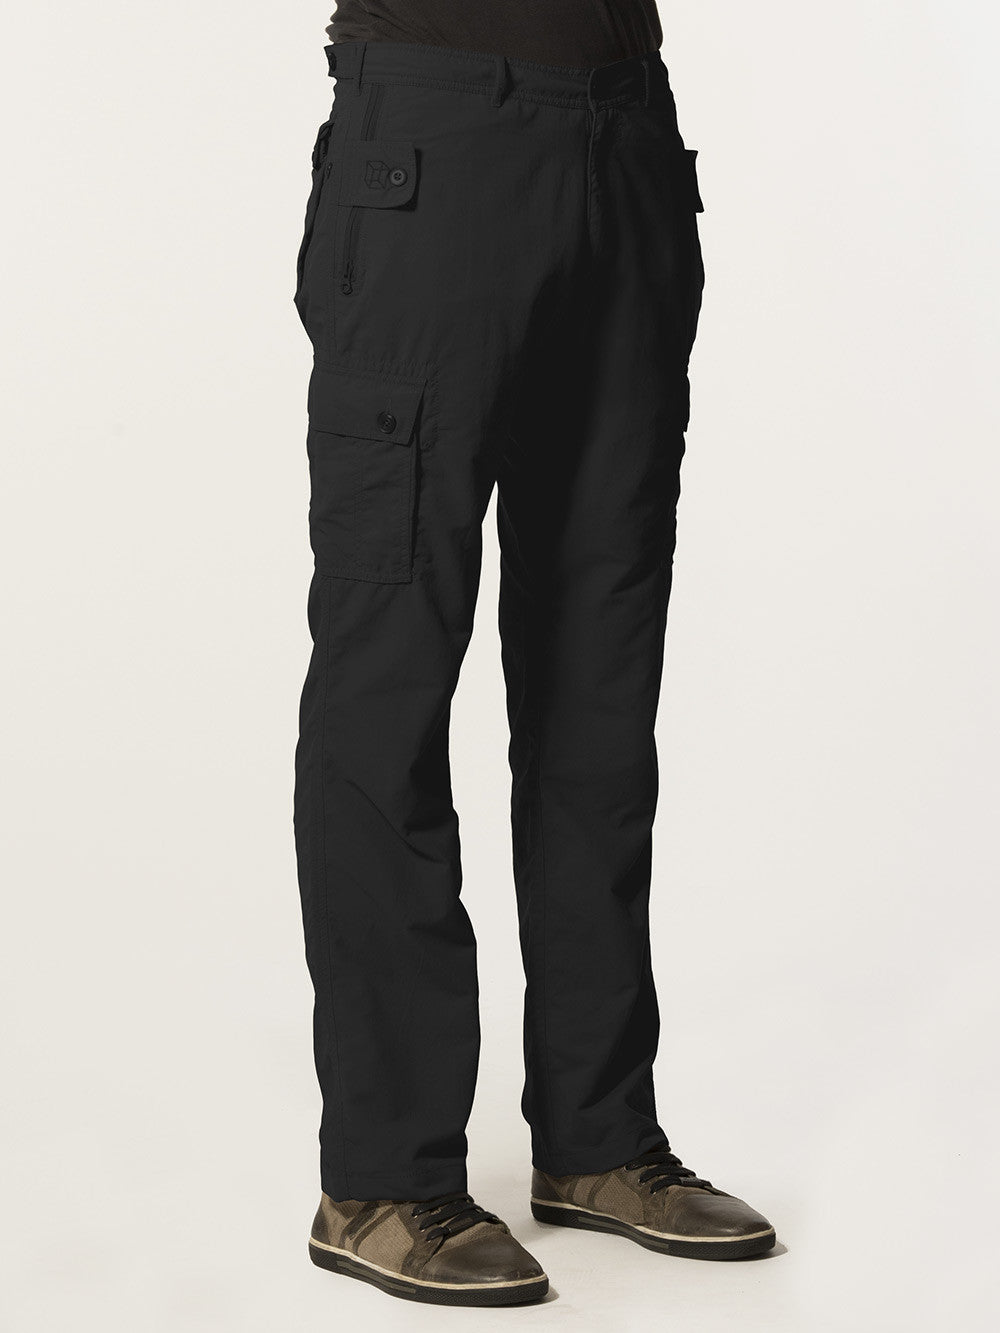 Clothing Arts Review: Pick-Pocket Proof Adventure Pants offer hidden  security – The Denver Post